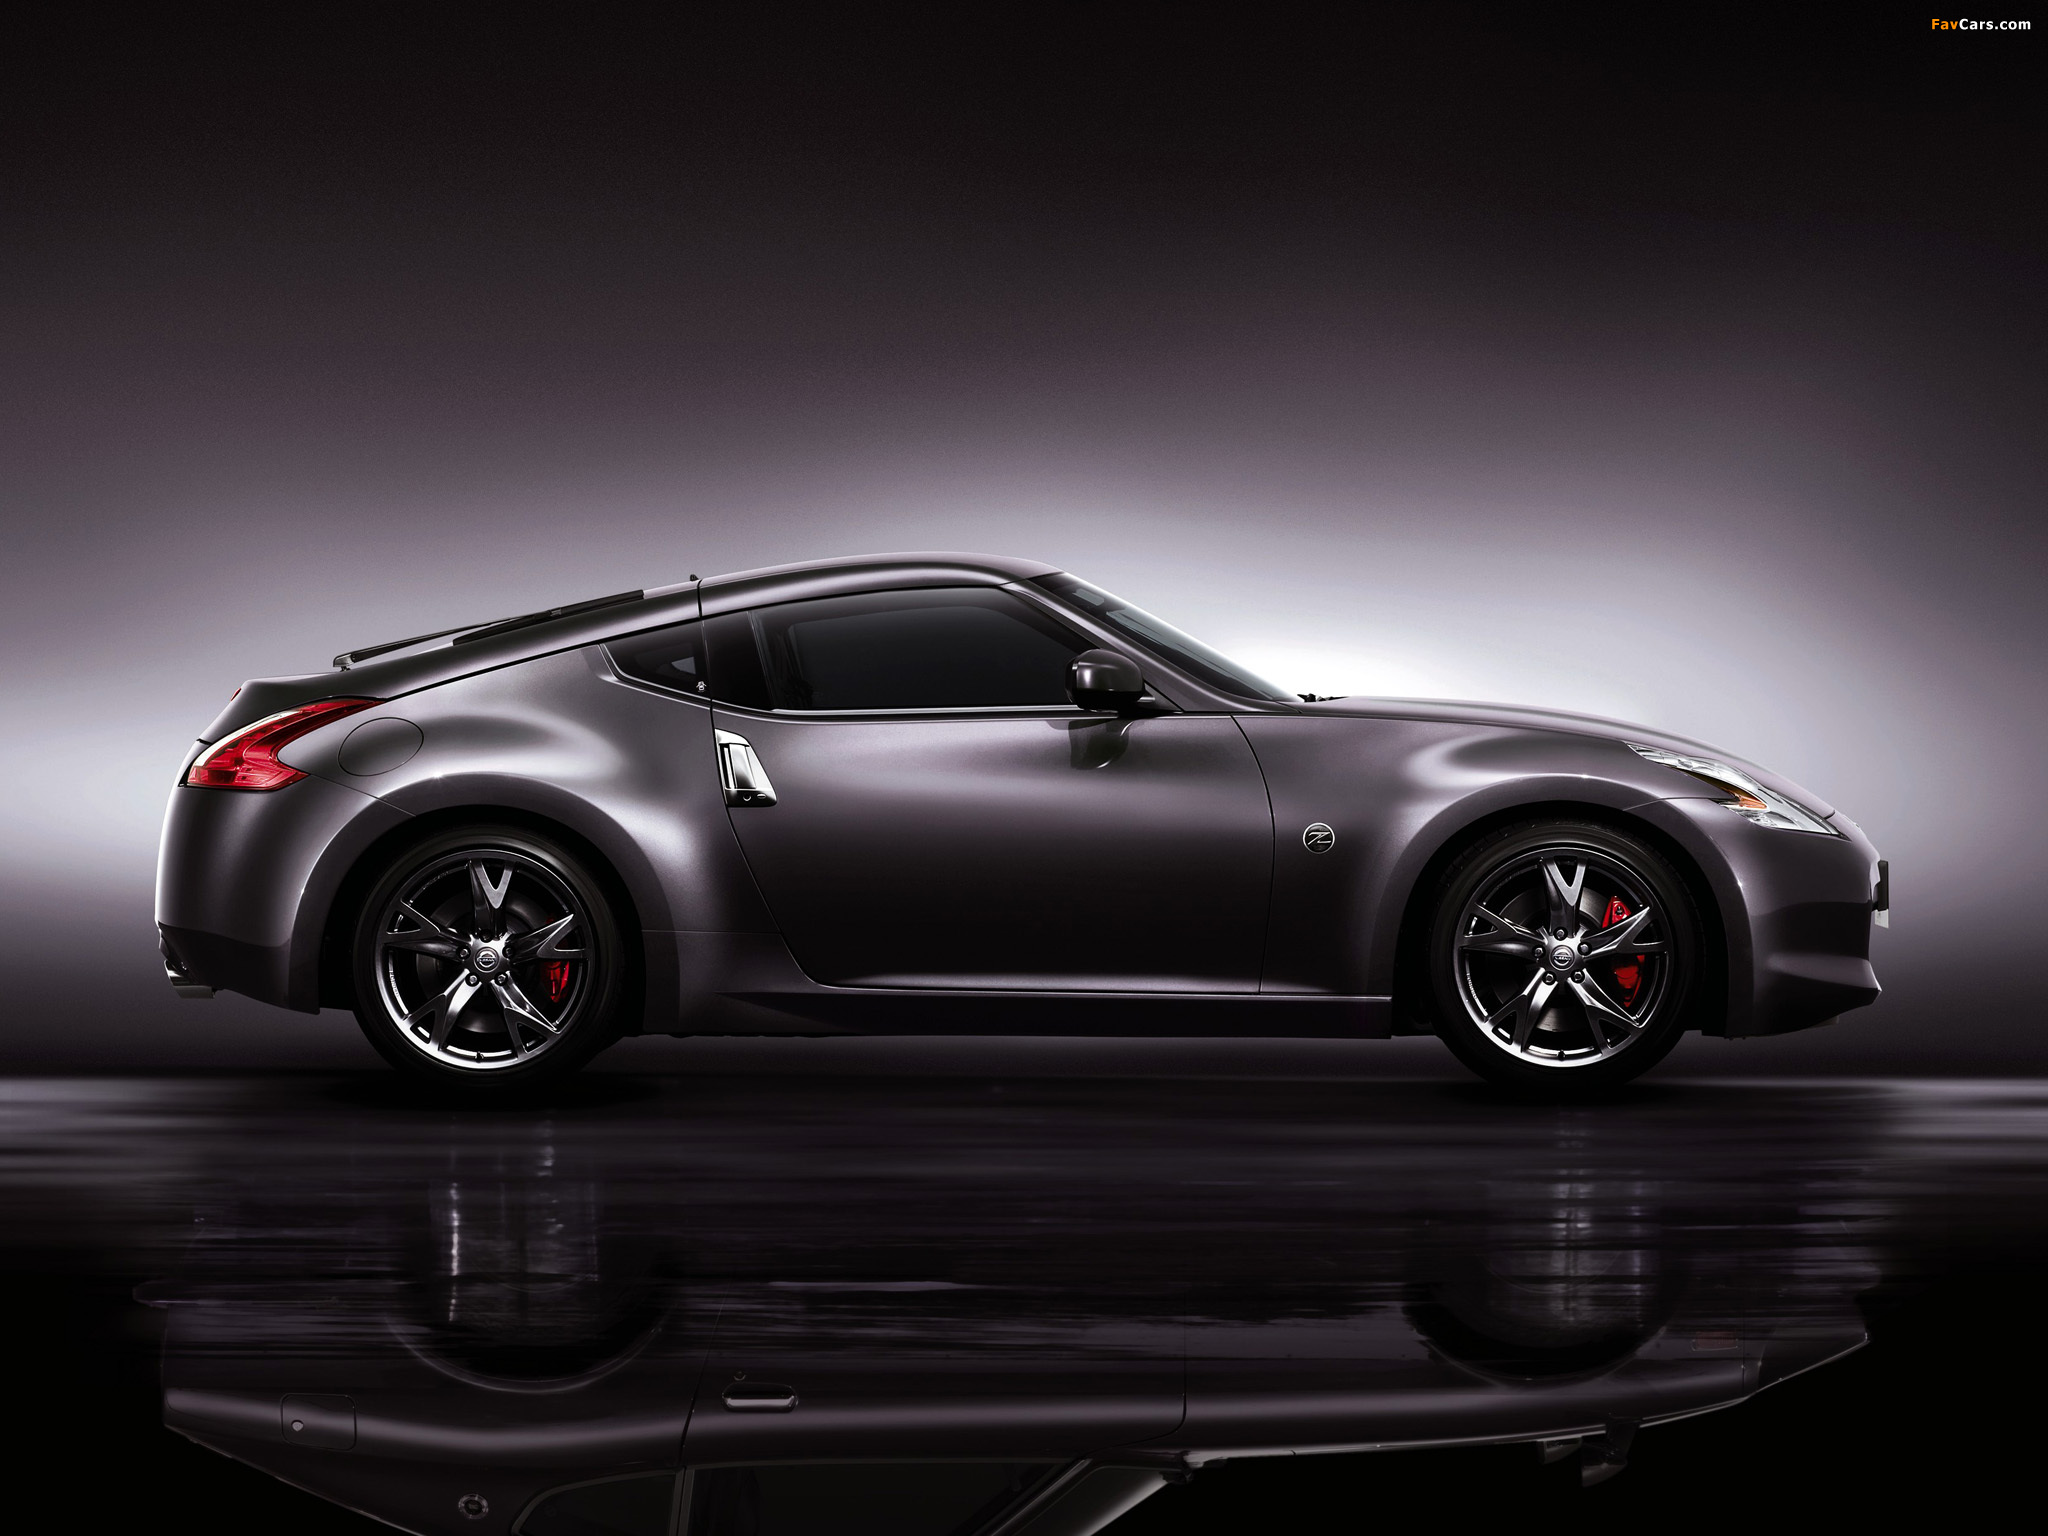 Nissan Fairlady Z 40th Anniversary 2009 wallpapers (2048 x 1536)